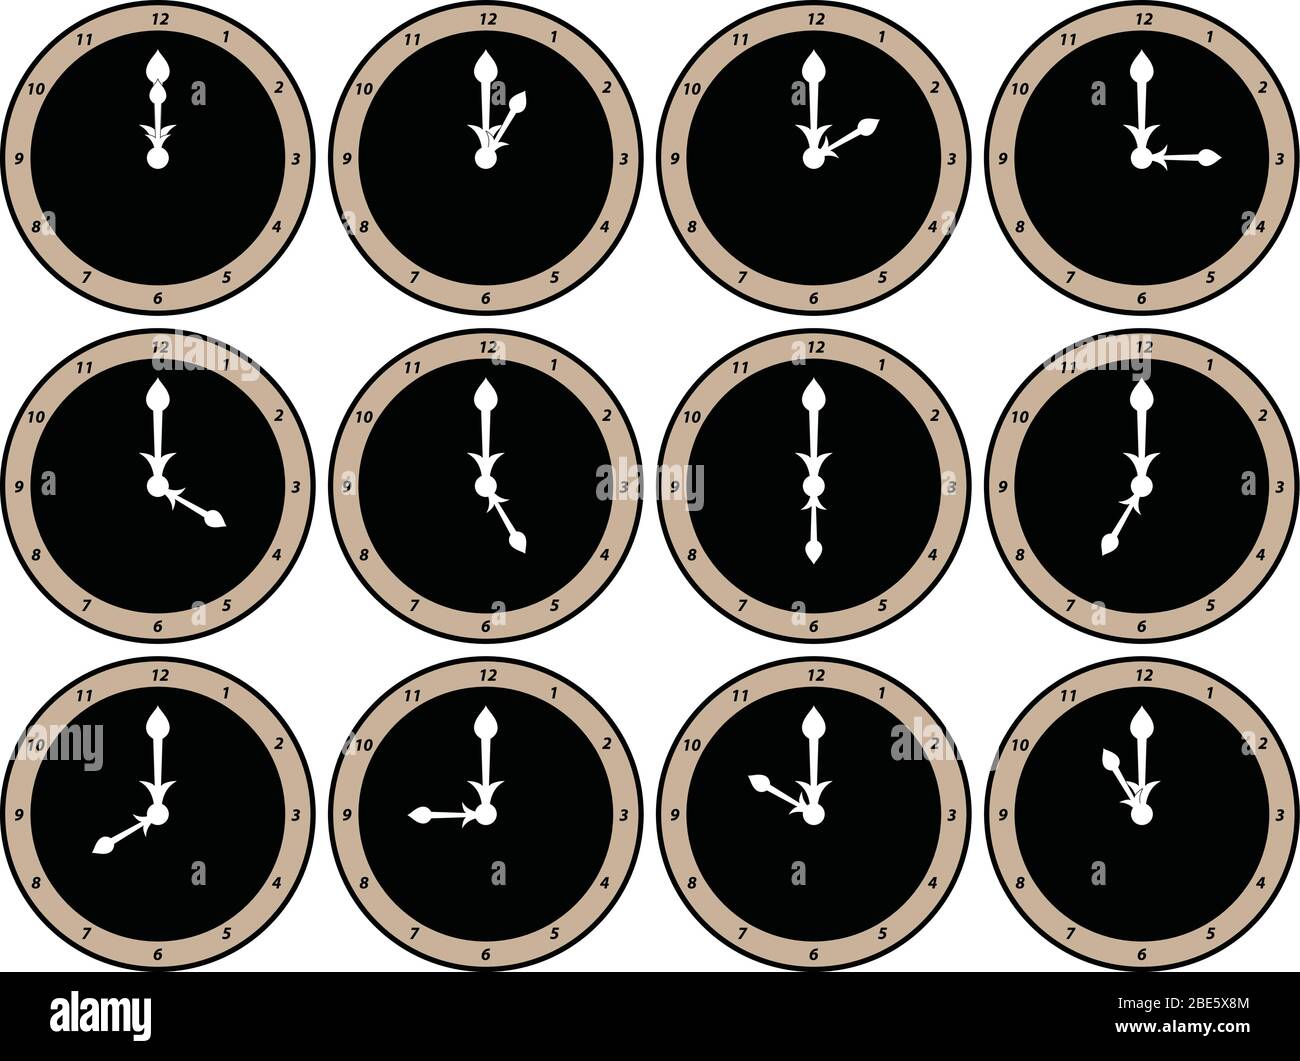 Twelve analog clock faces with white hour and minute hands showing time on the hour from 12 o'clock to 11 o'clock Stock Vector